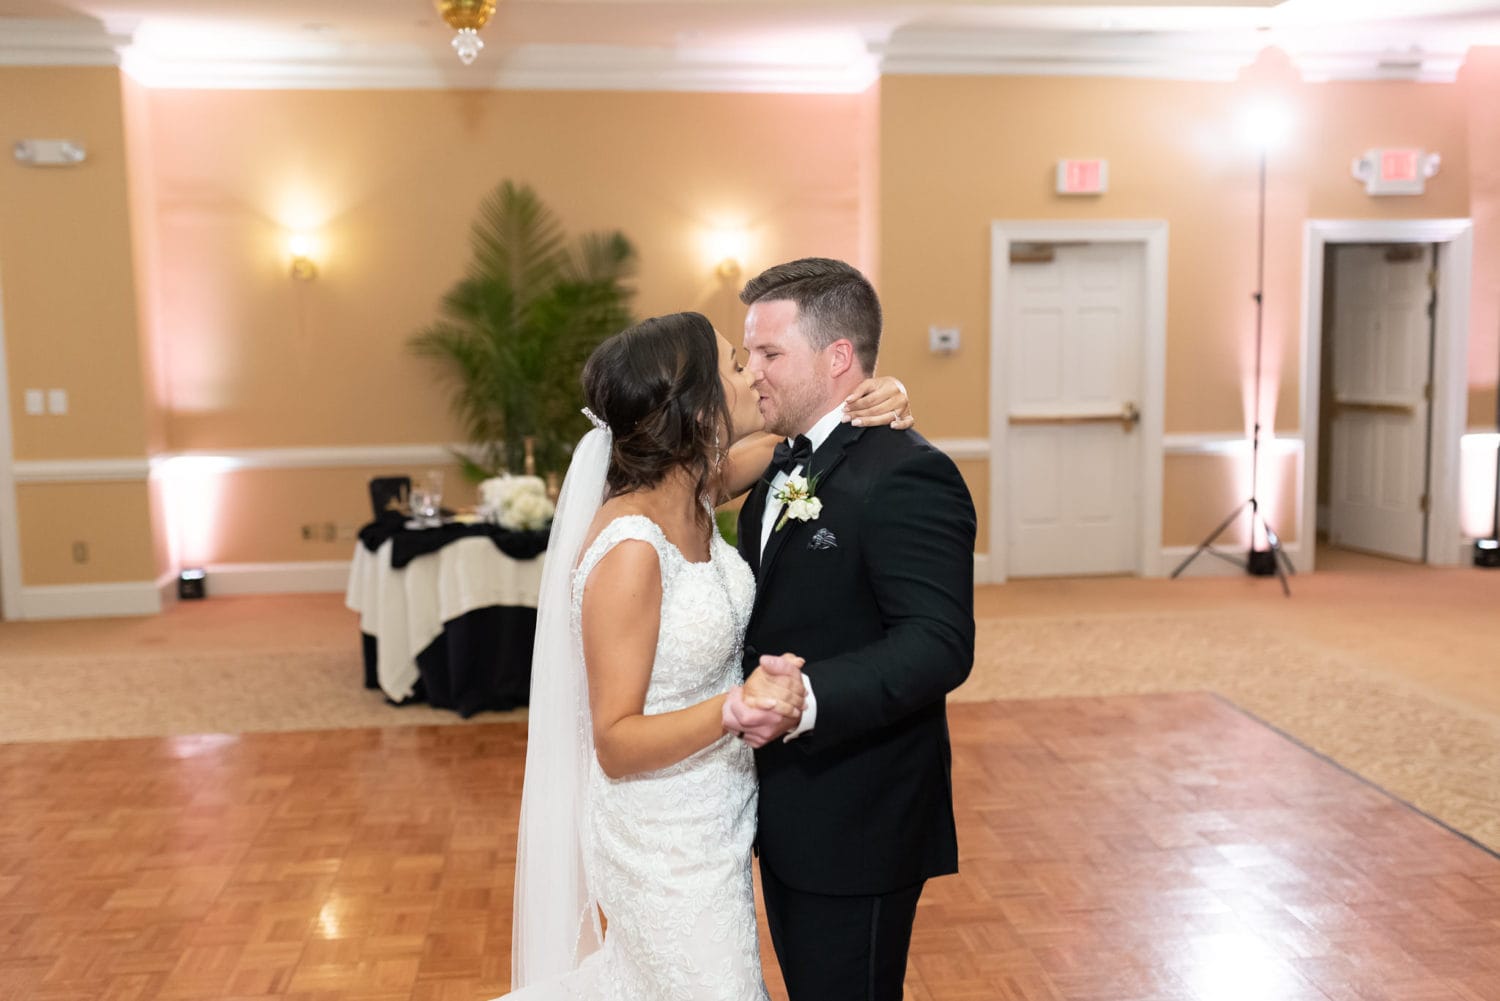 Bride and groom first dance Pawleys Plantation